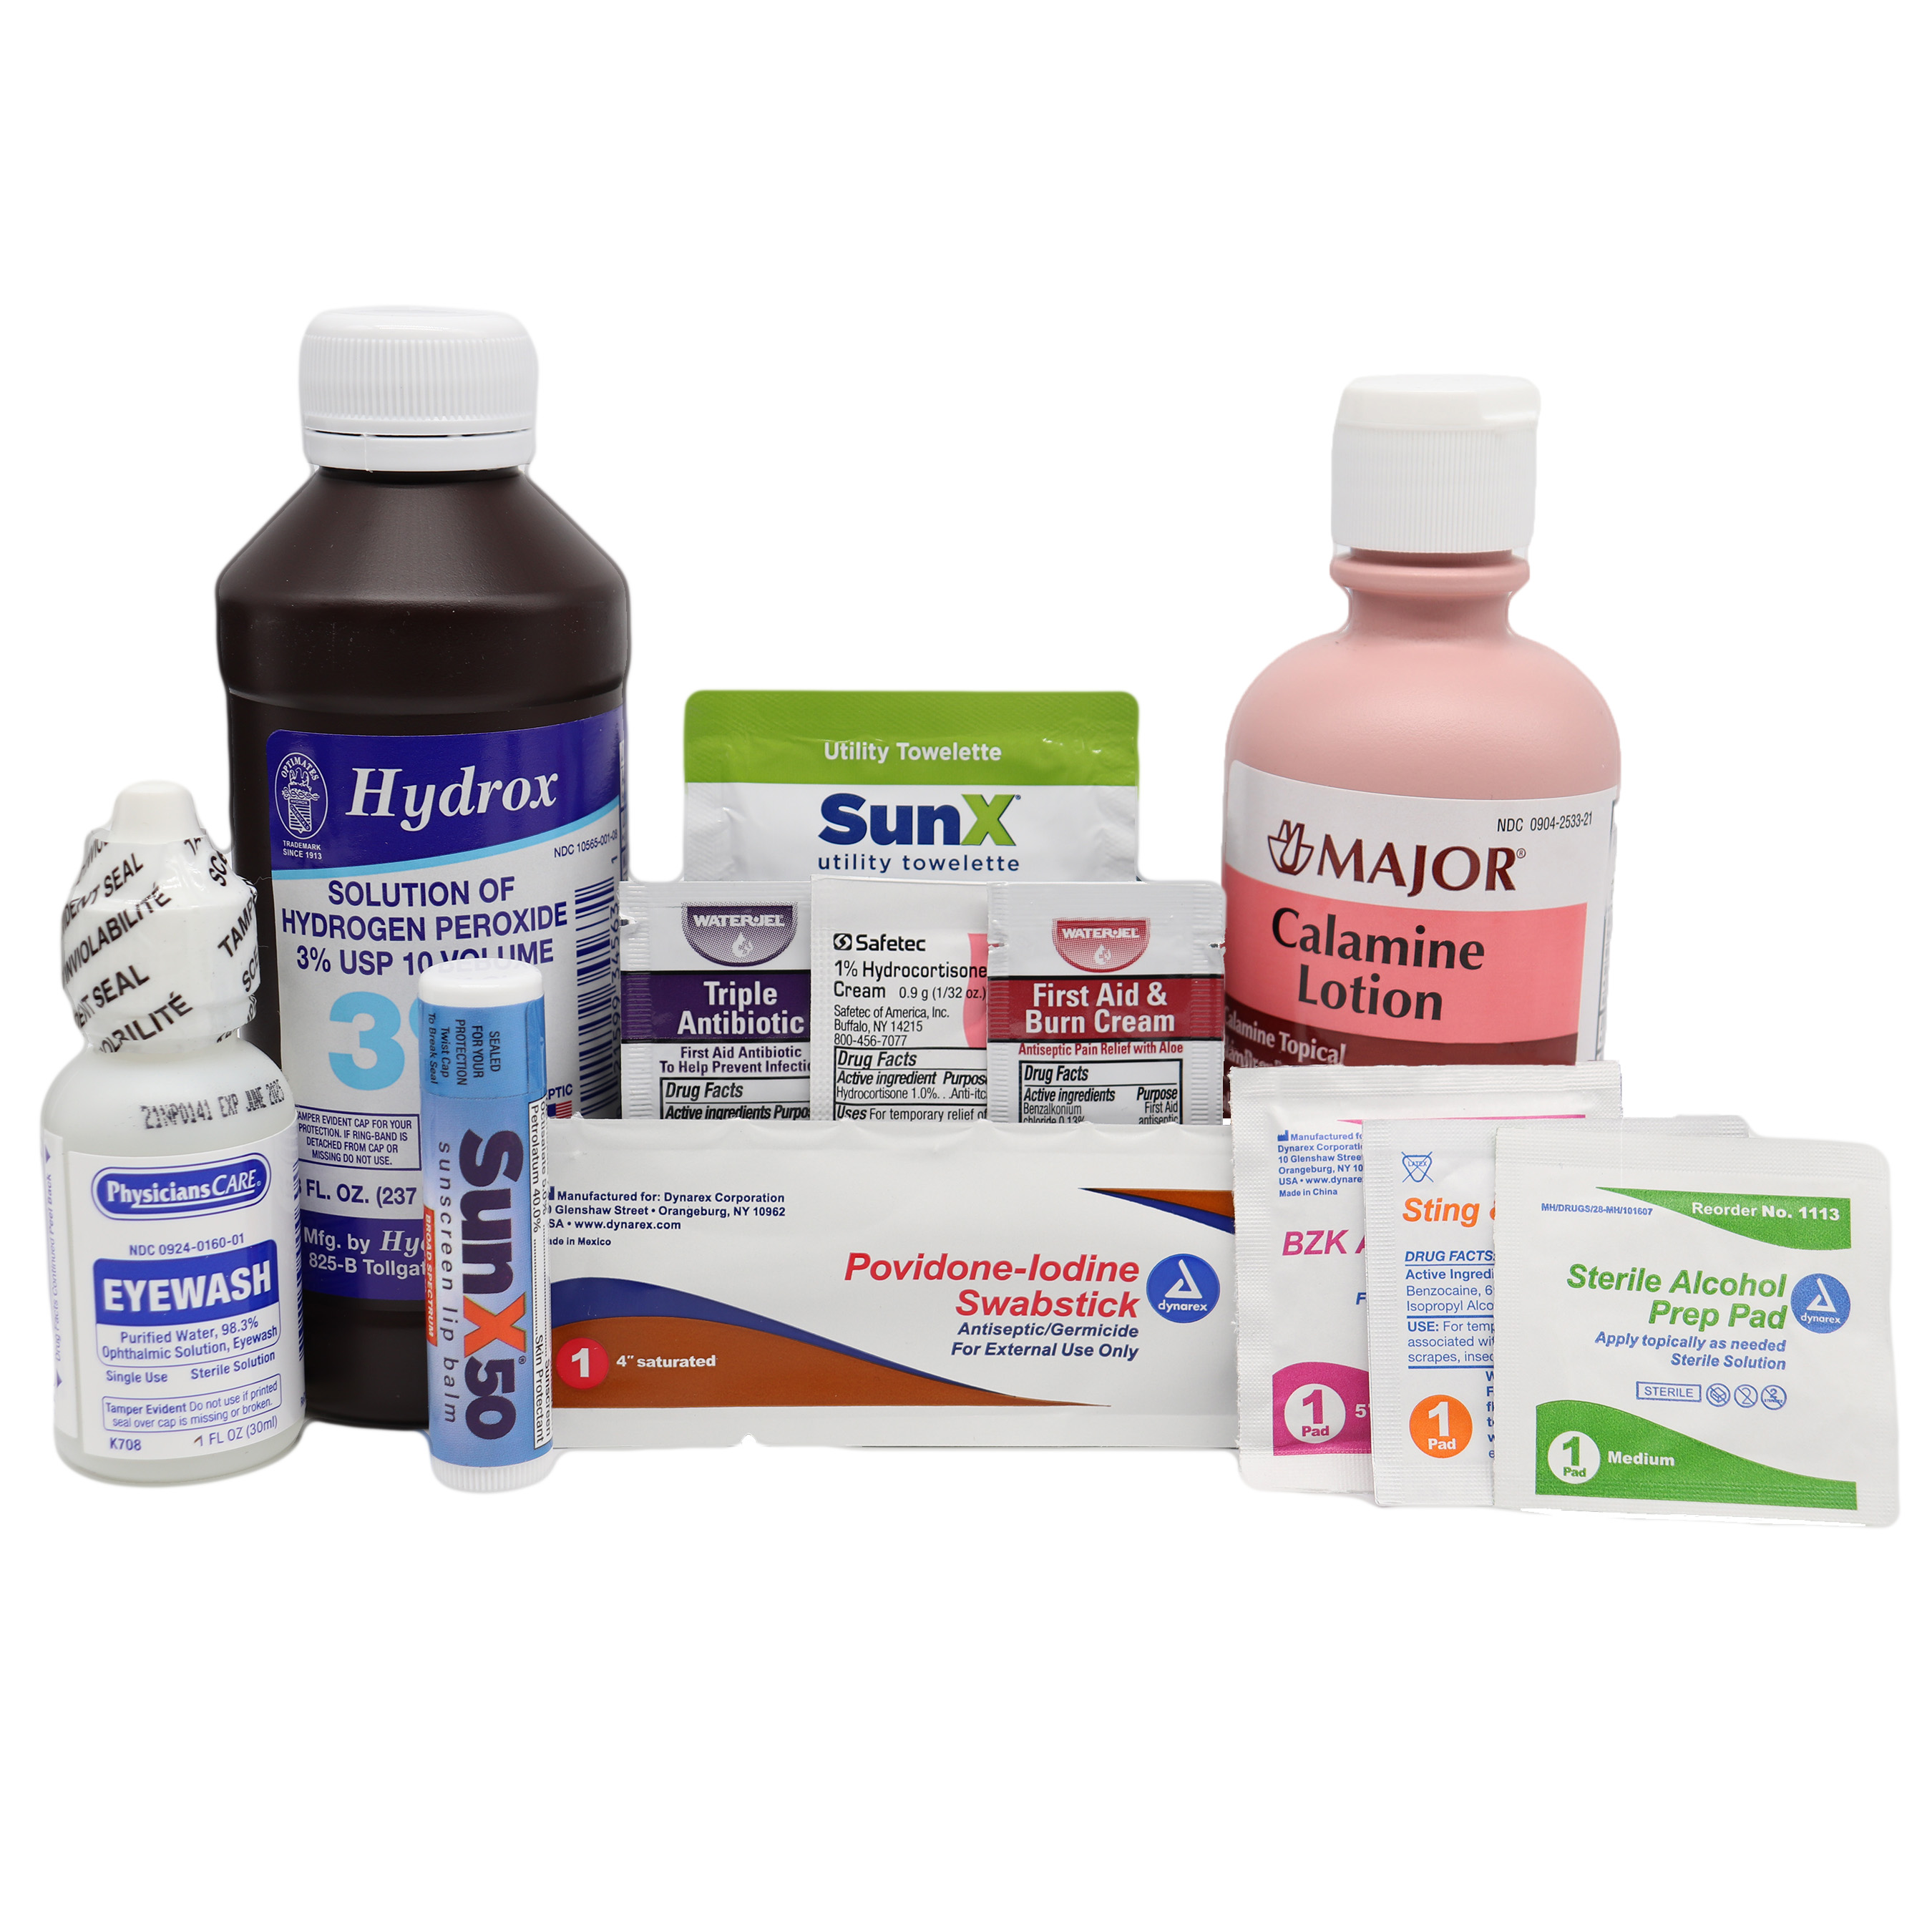 Ointment and Topicals Refill Kit E-FirstAid